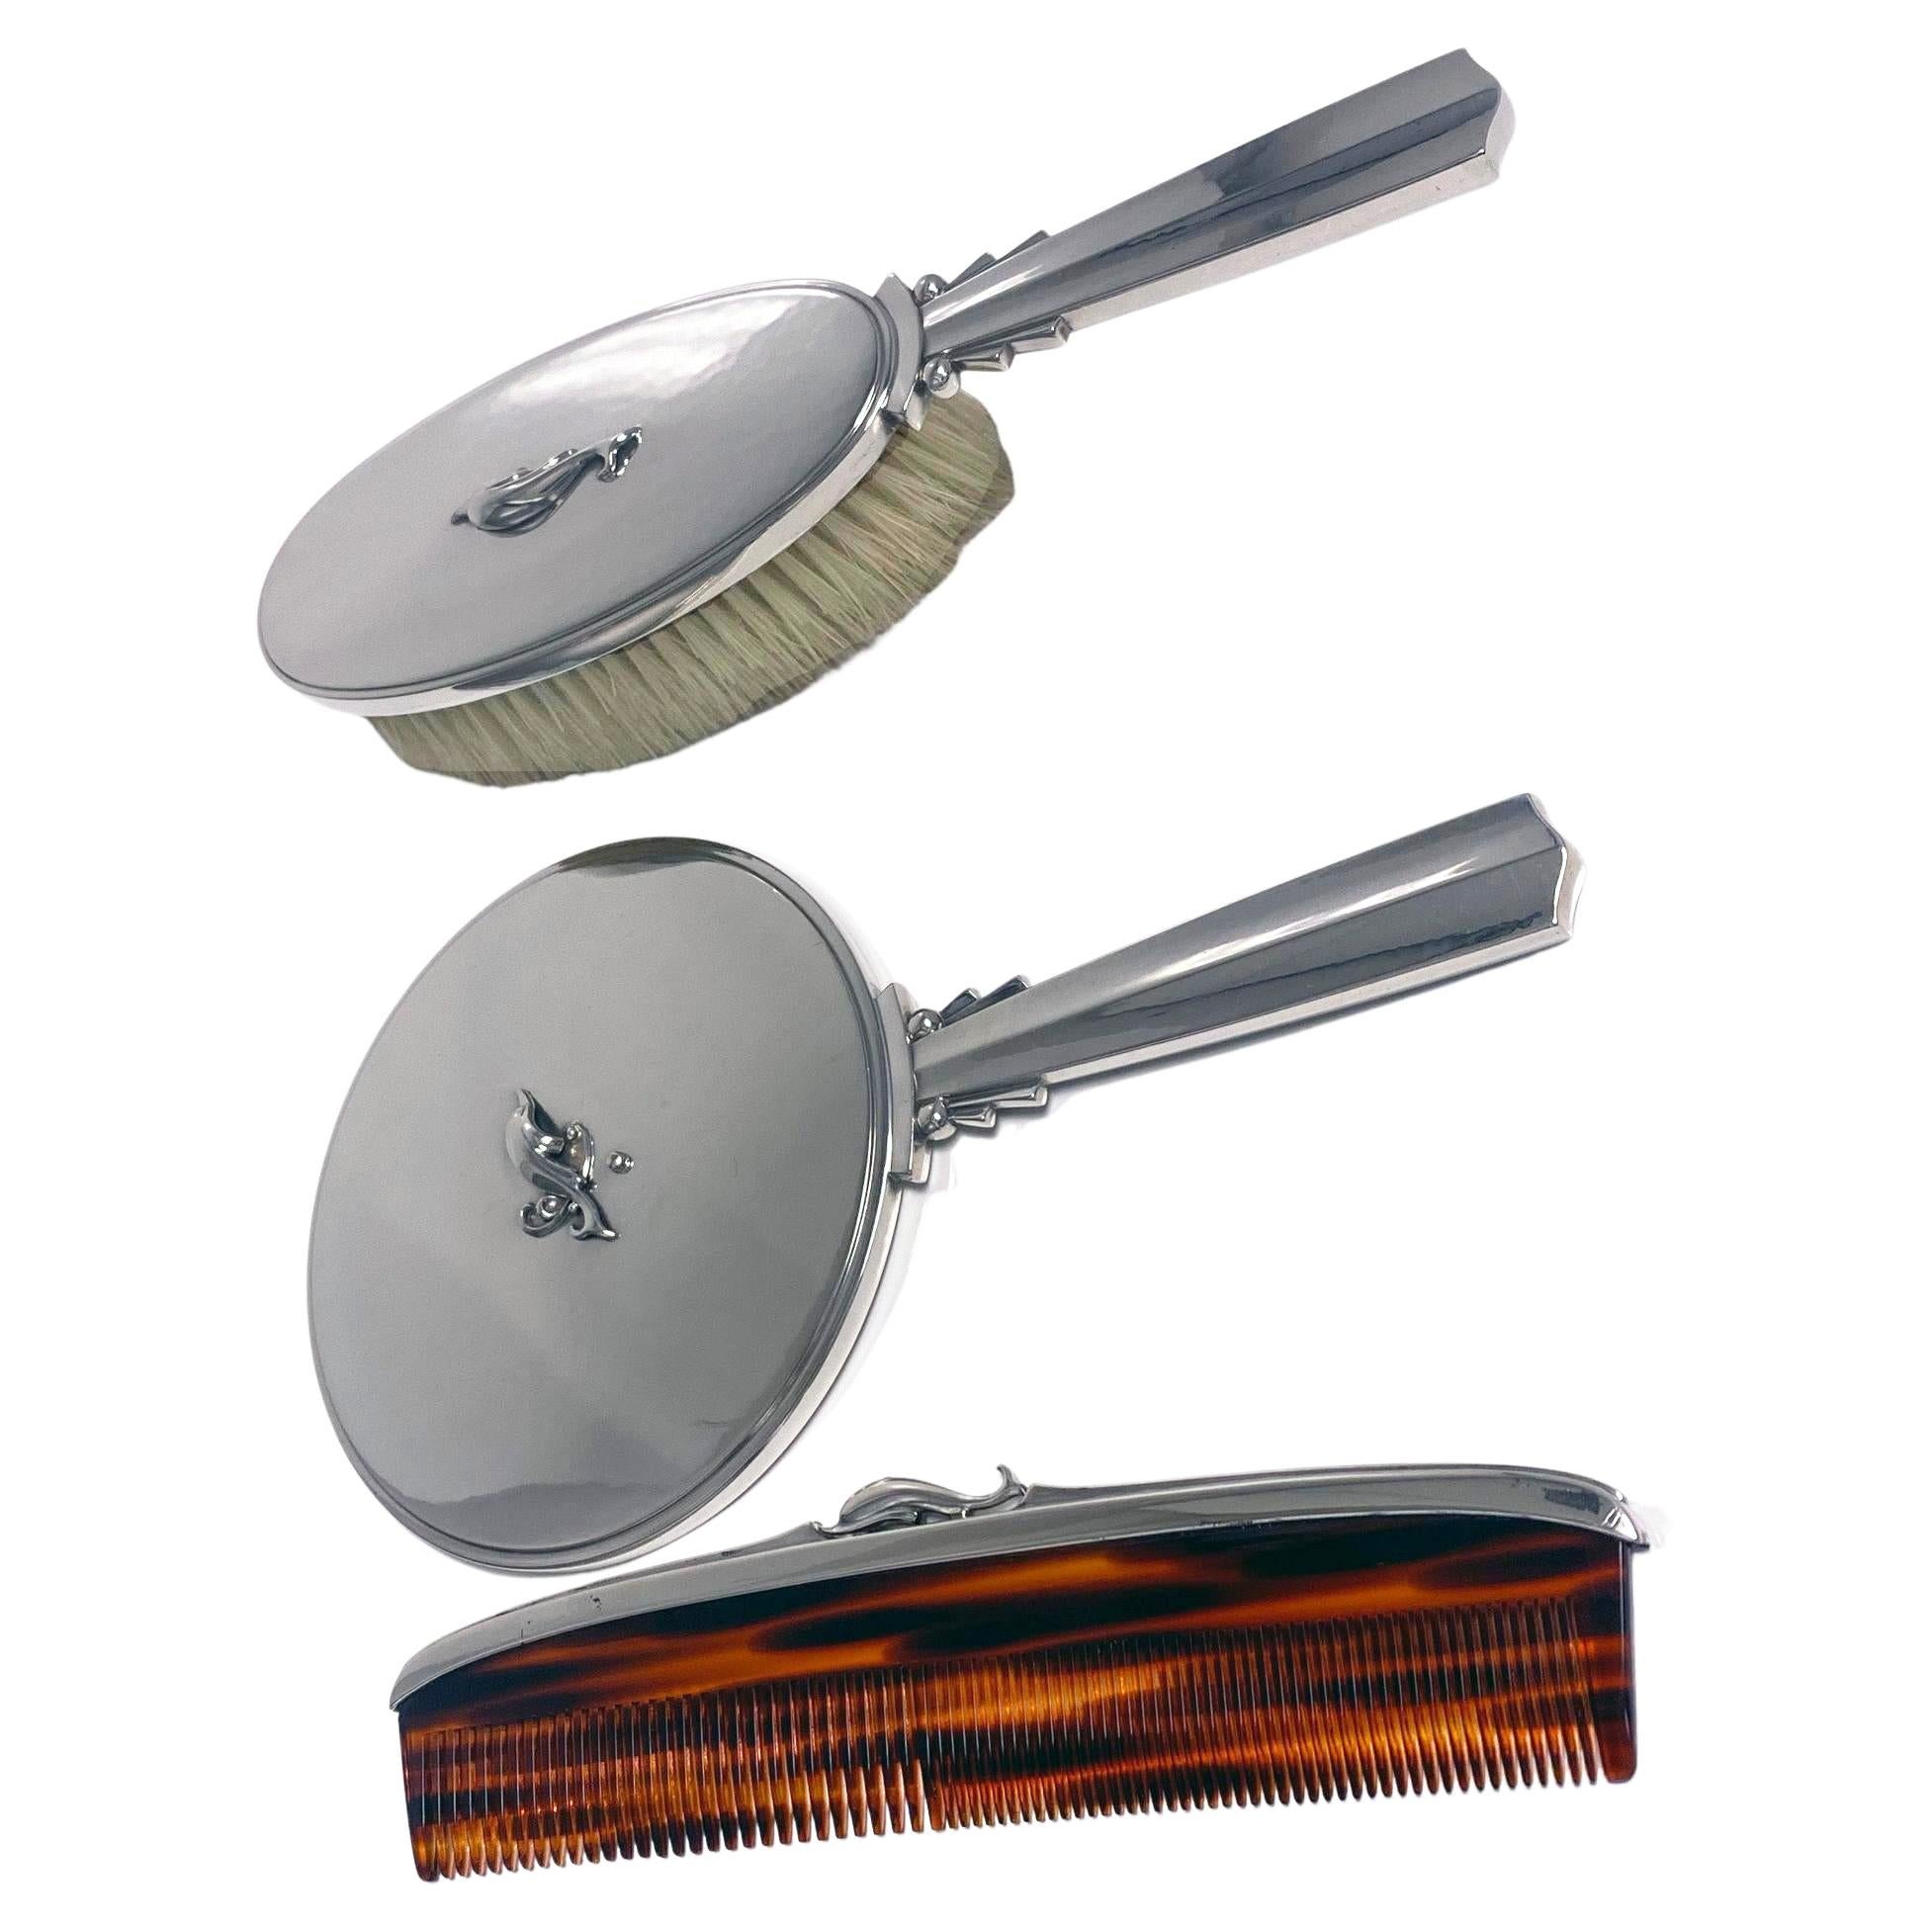 Georg Jensen Art Deco sterling silver vanity set Dolphin pattern. The set comprising Hand Mirror, Brush and Comb, designed by Harald Nielsen. Lengths of Mirror and Brush 8.75 inches; Comb 7.75 inches. Light hammered design with dolphin accents. Very